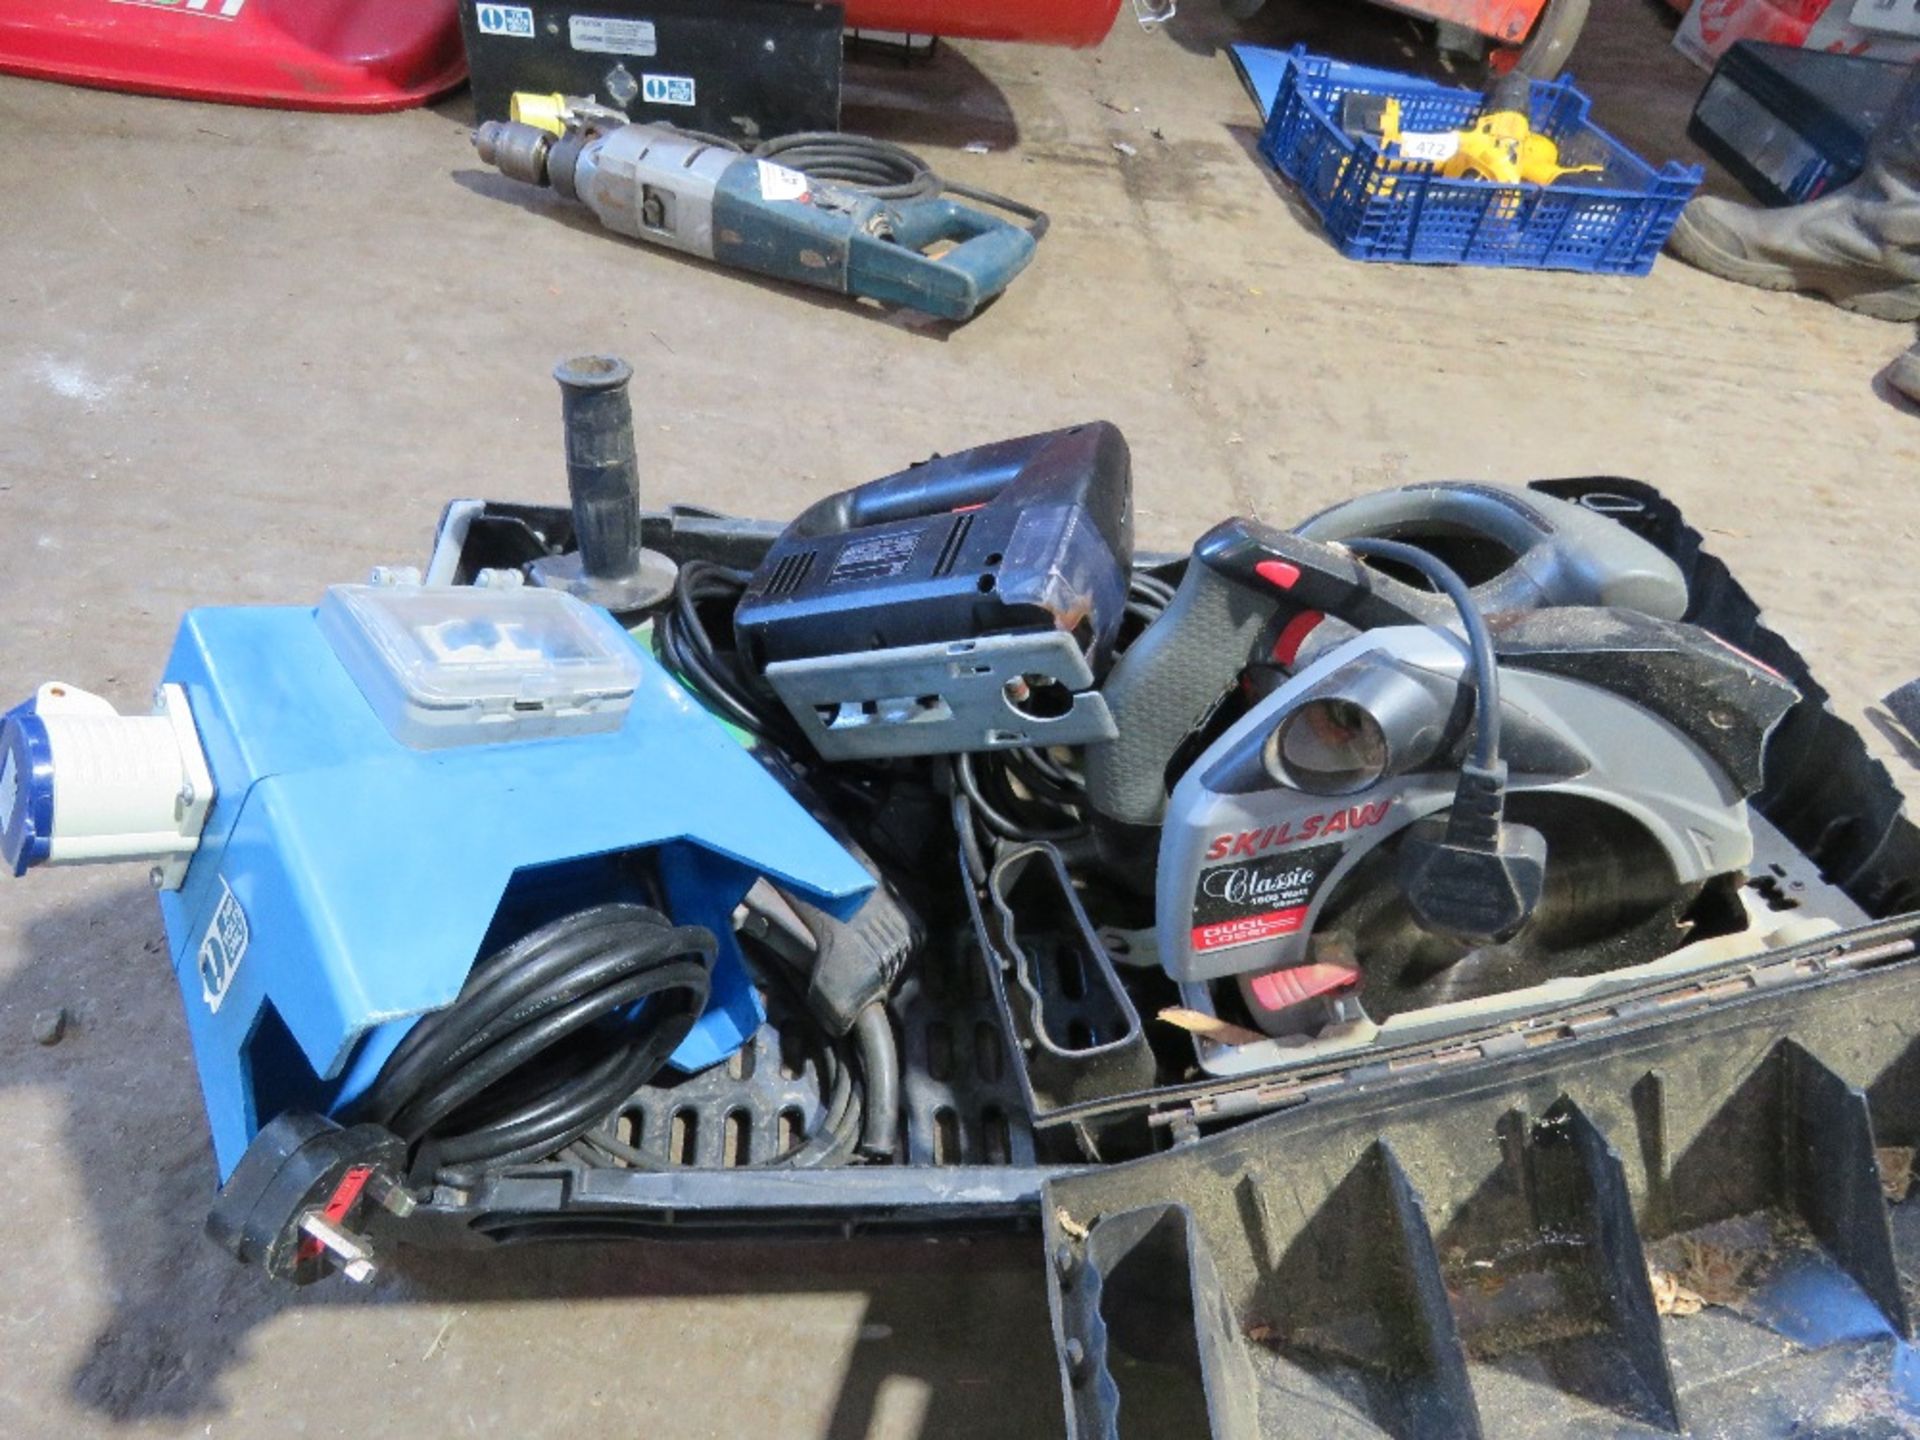 240V JIGSAW, GRINDER, CIRCULAR SAW AND JUNCTION SAW IN BOX. - Image 2 of 3